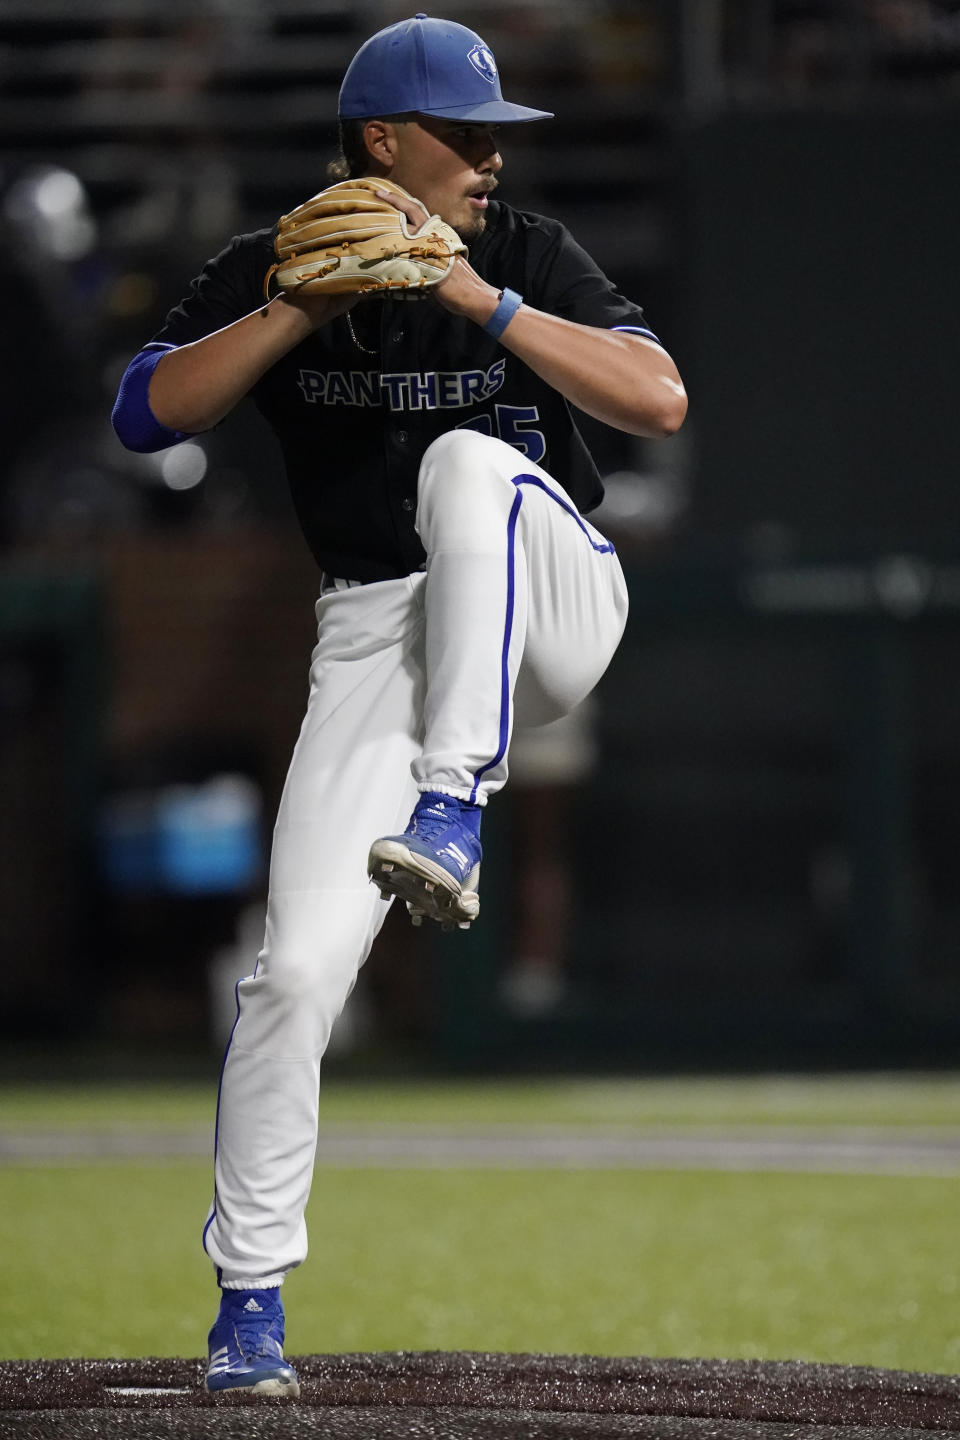 Eastern Illinois pitcher Colton Coca winds up during the seventh inning of the team's NCAA college baseball tournament regional game against Vanderbilt on Friday, June 2, 2023, in Nashville, Tenn. (AP Photo/George Walker IV)